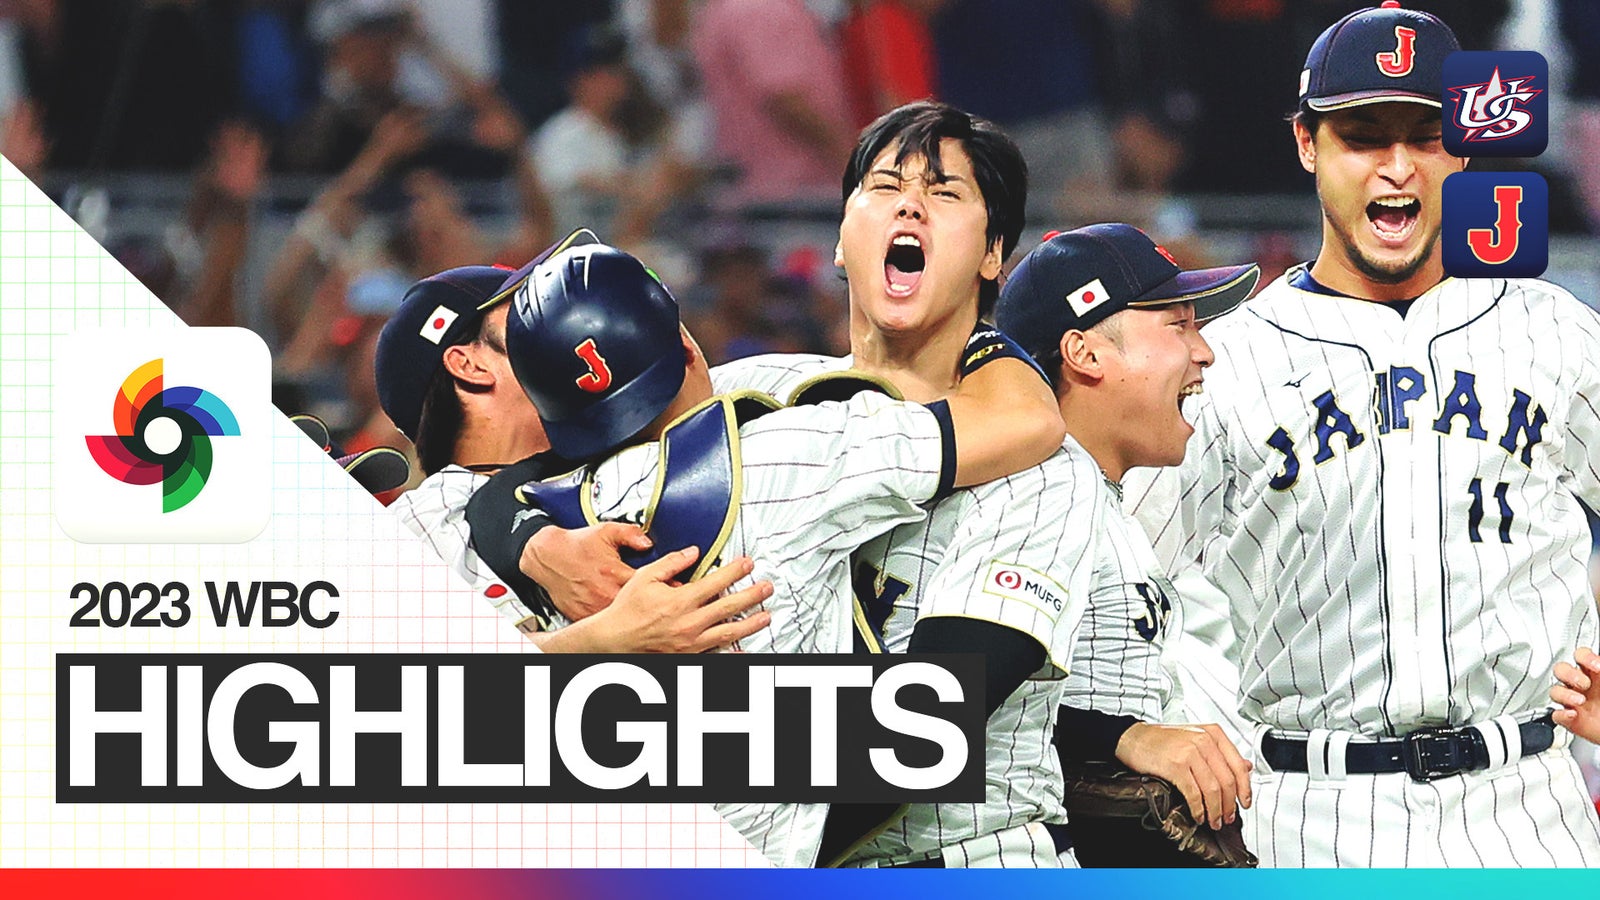 In a storybook ending, Ohtani strikes out Trout at World Baseball Classic  for Japanese championship